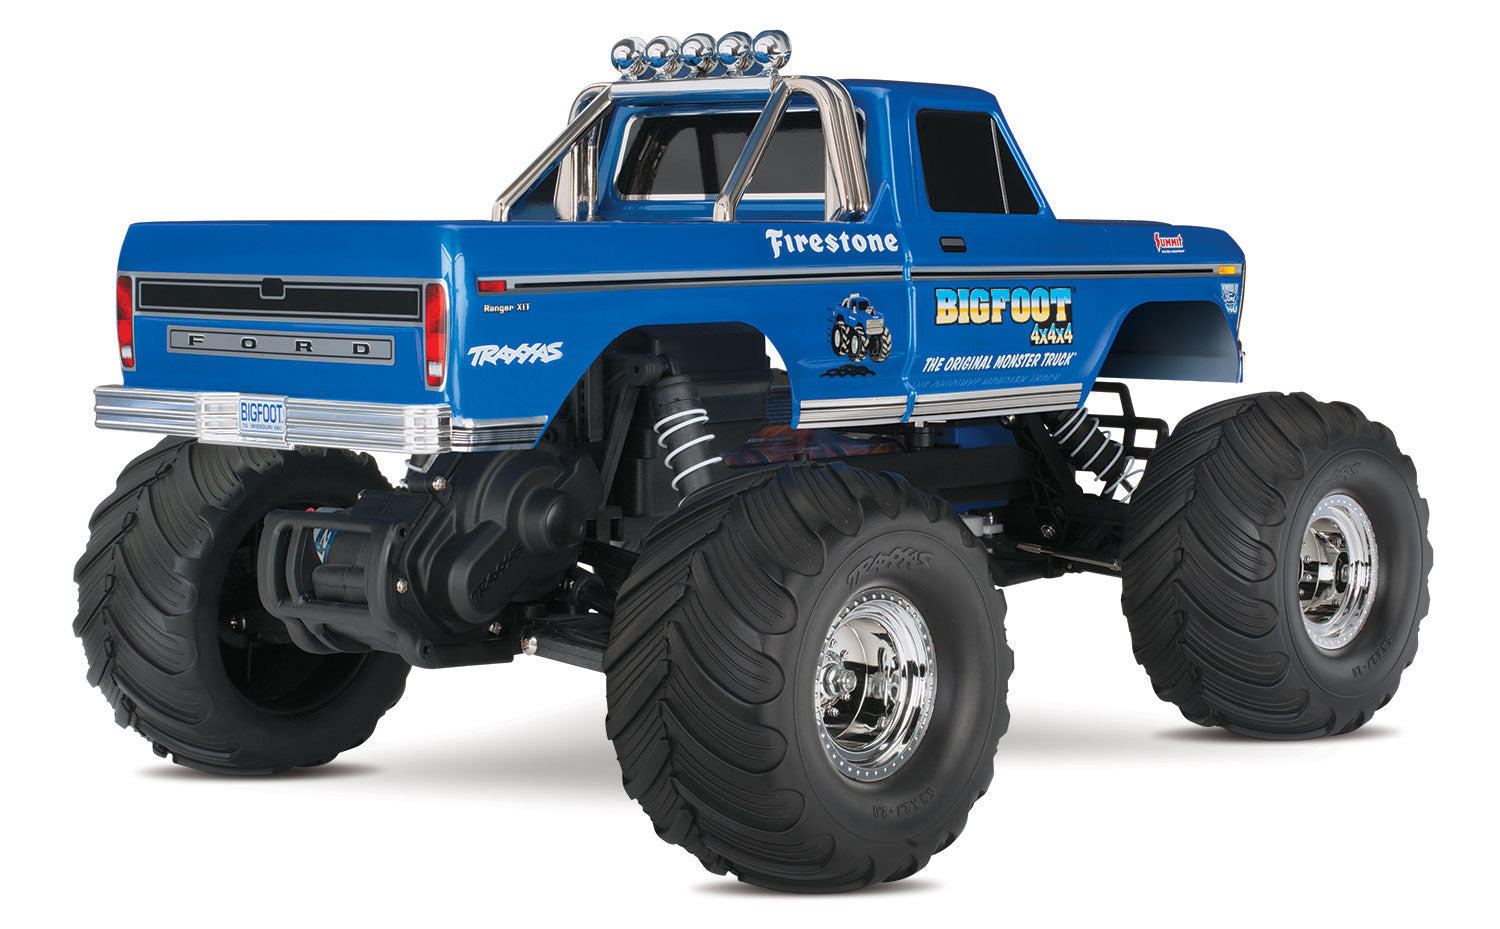 Traxxas "Bigfoot No.1" Original Monster RTR 1/10 2WD Monster Truck w/TQ 2.4GHz Radio, Battery & DC Charger